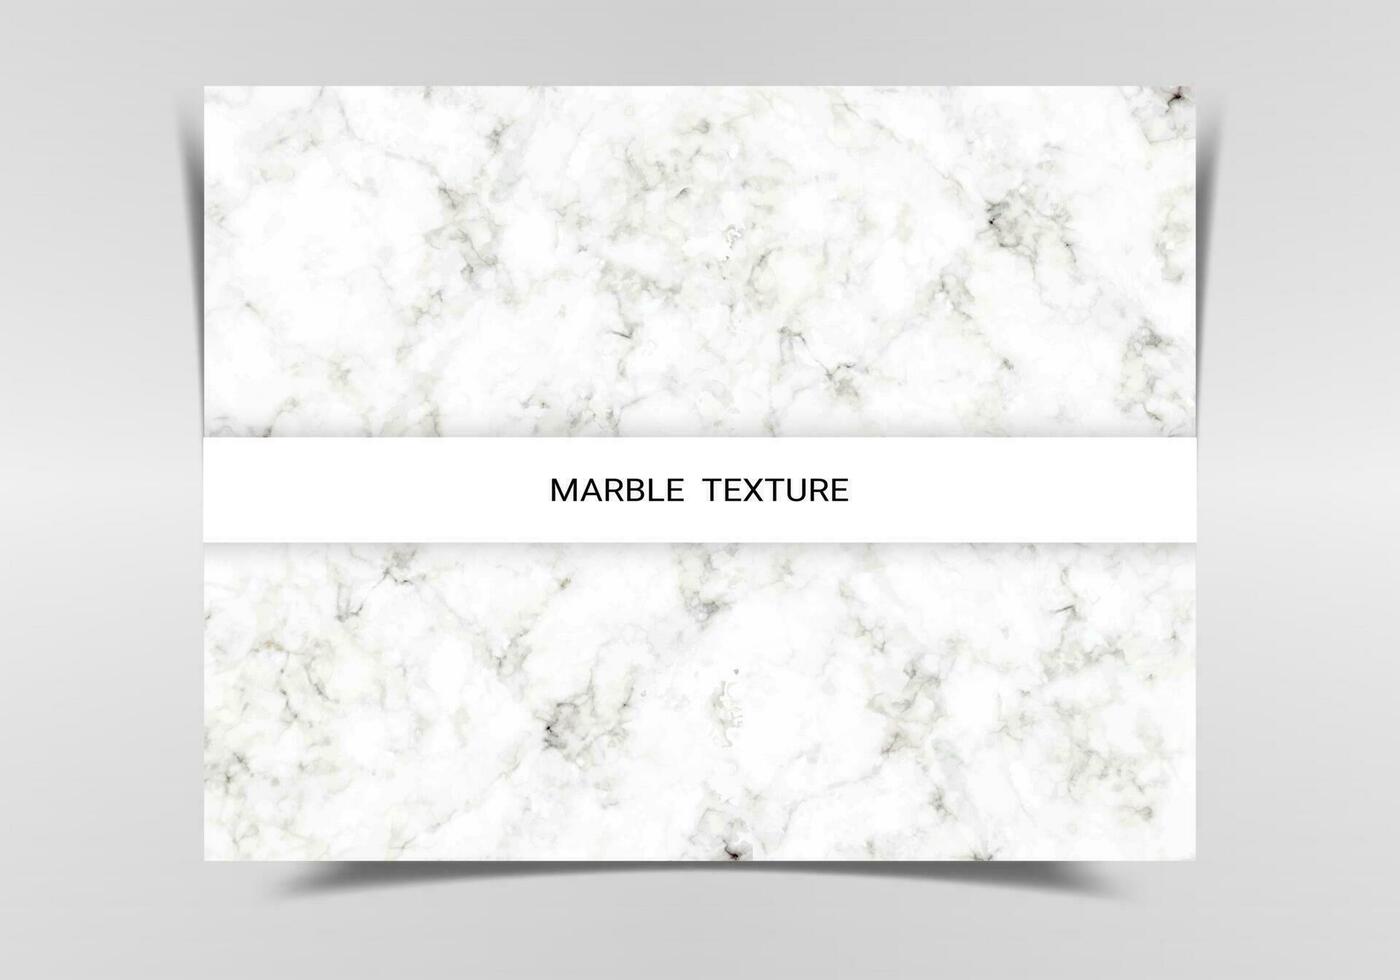 Luxury Marble  Tile Texture Design, Wall Texure vector